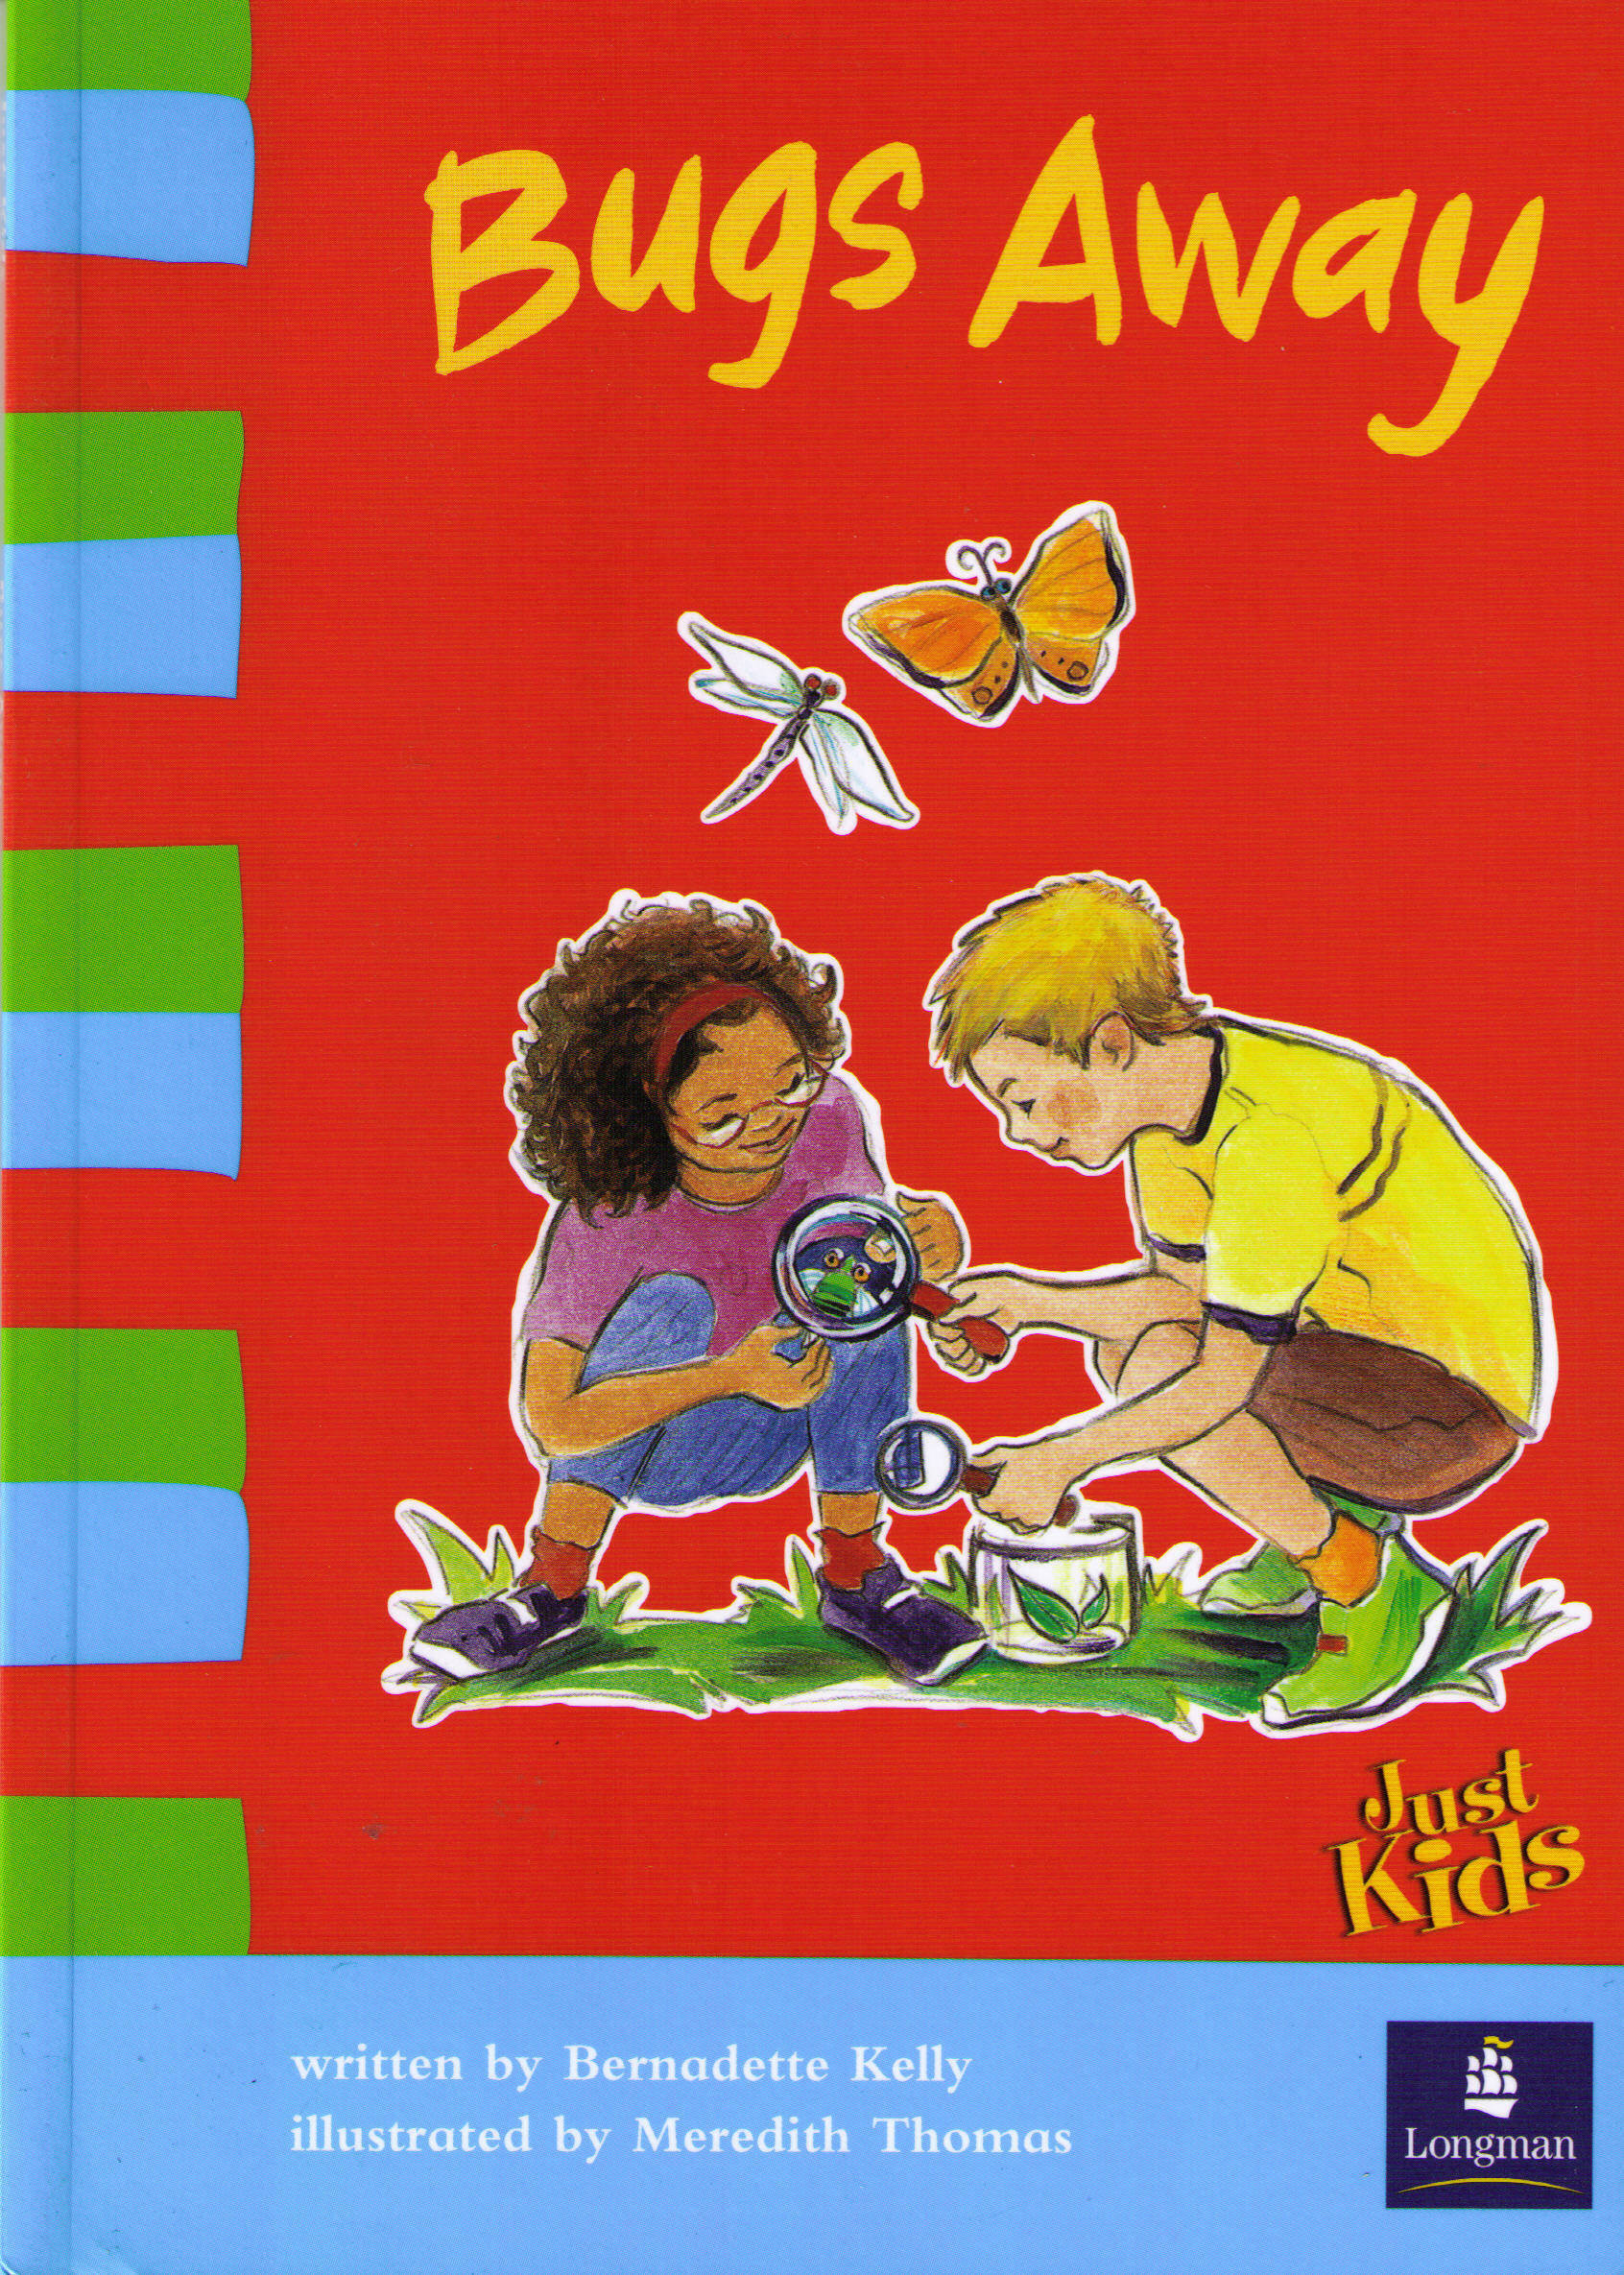 Lisa and Jay love collecting bugs and creepy crawlies. Part of Set 5 Just Kids series. Pearson Education Australia.